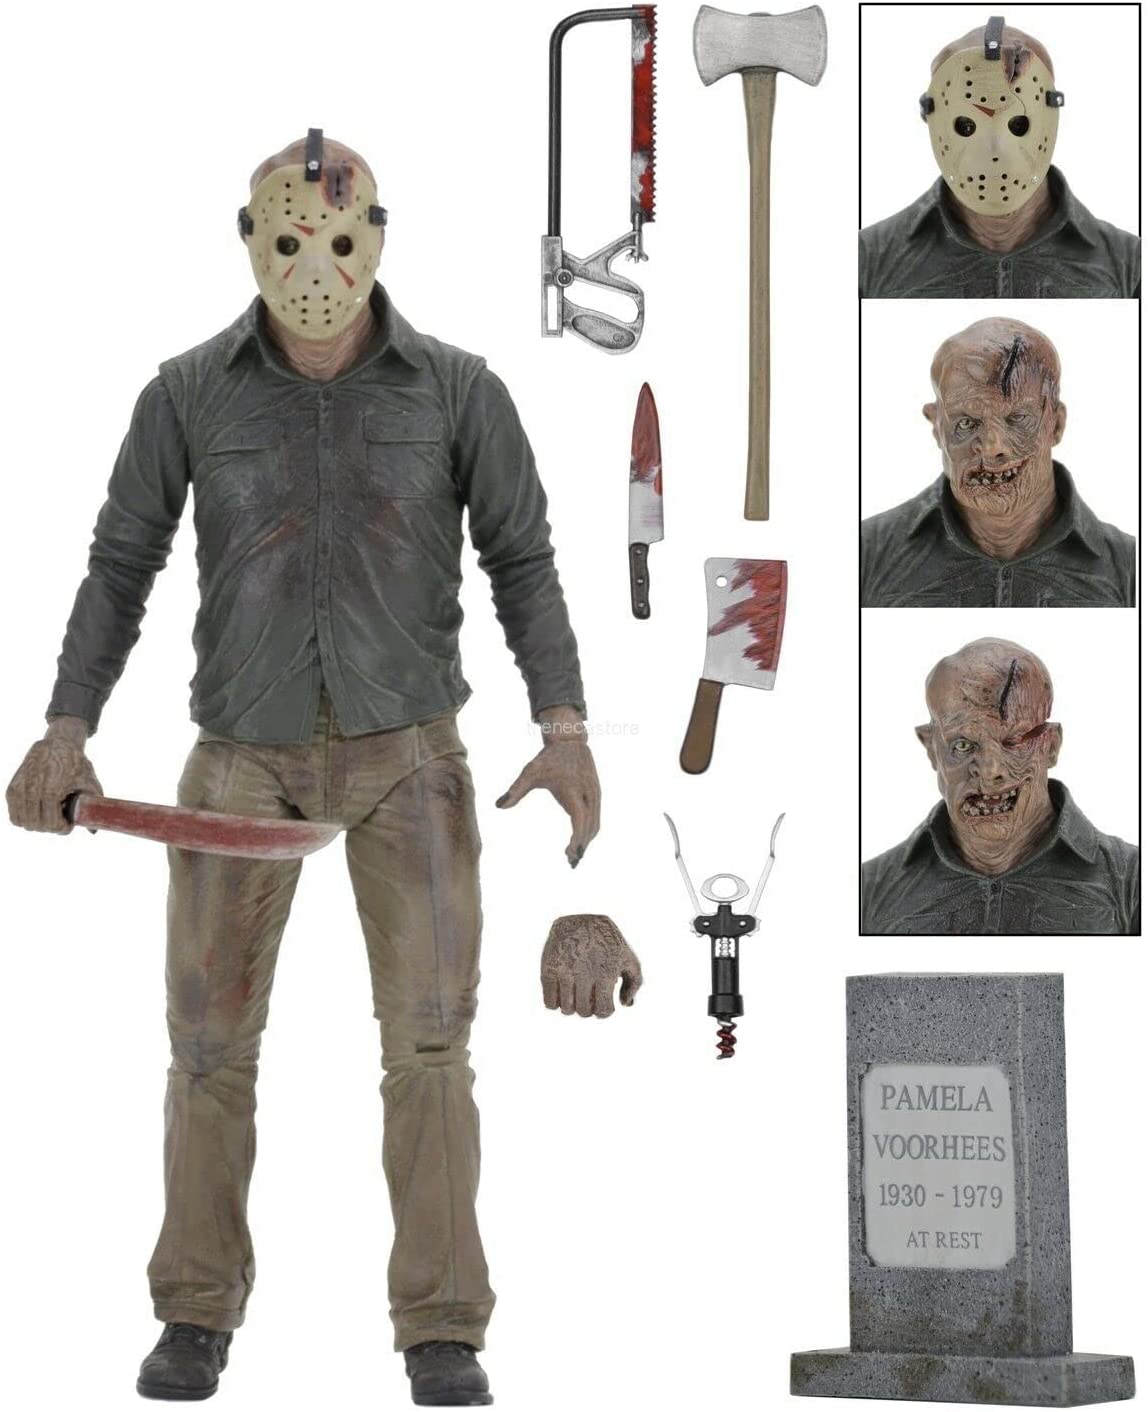 Jason Voorhees Ultimate - Friday the 13th: The Final Chapter NECA